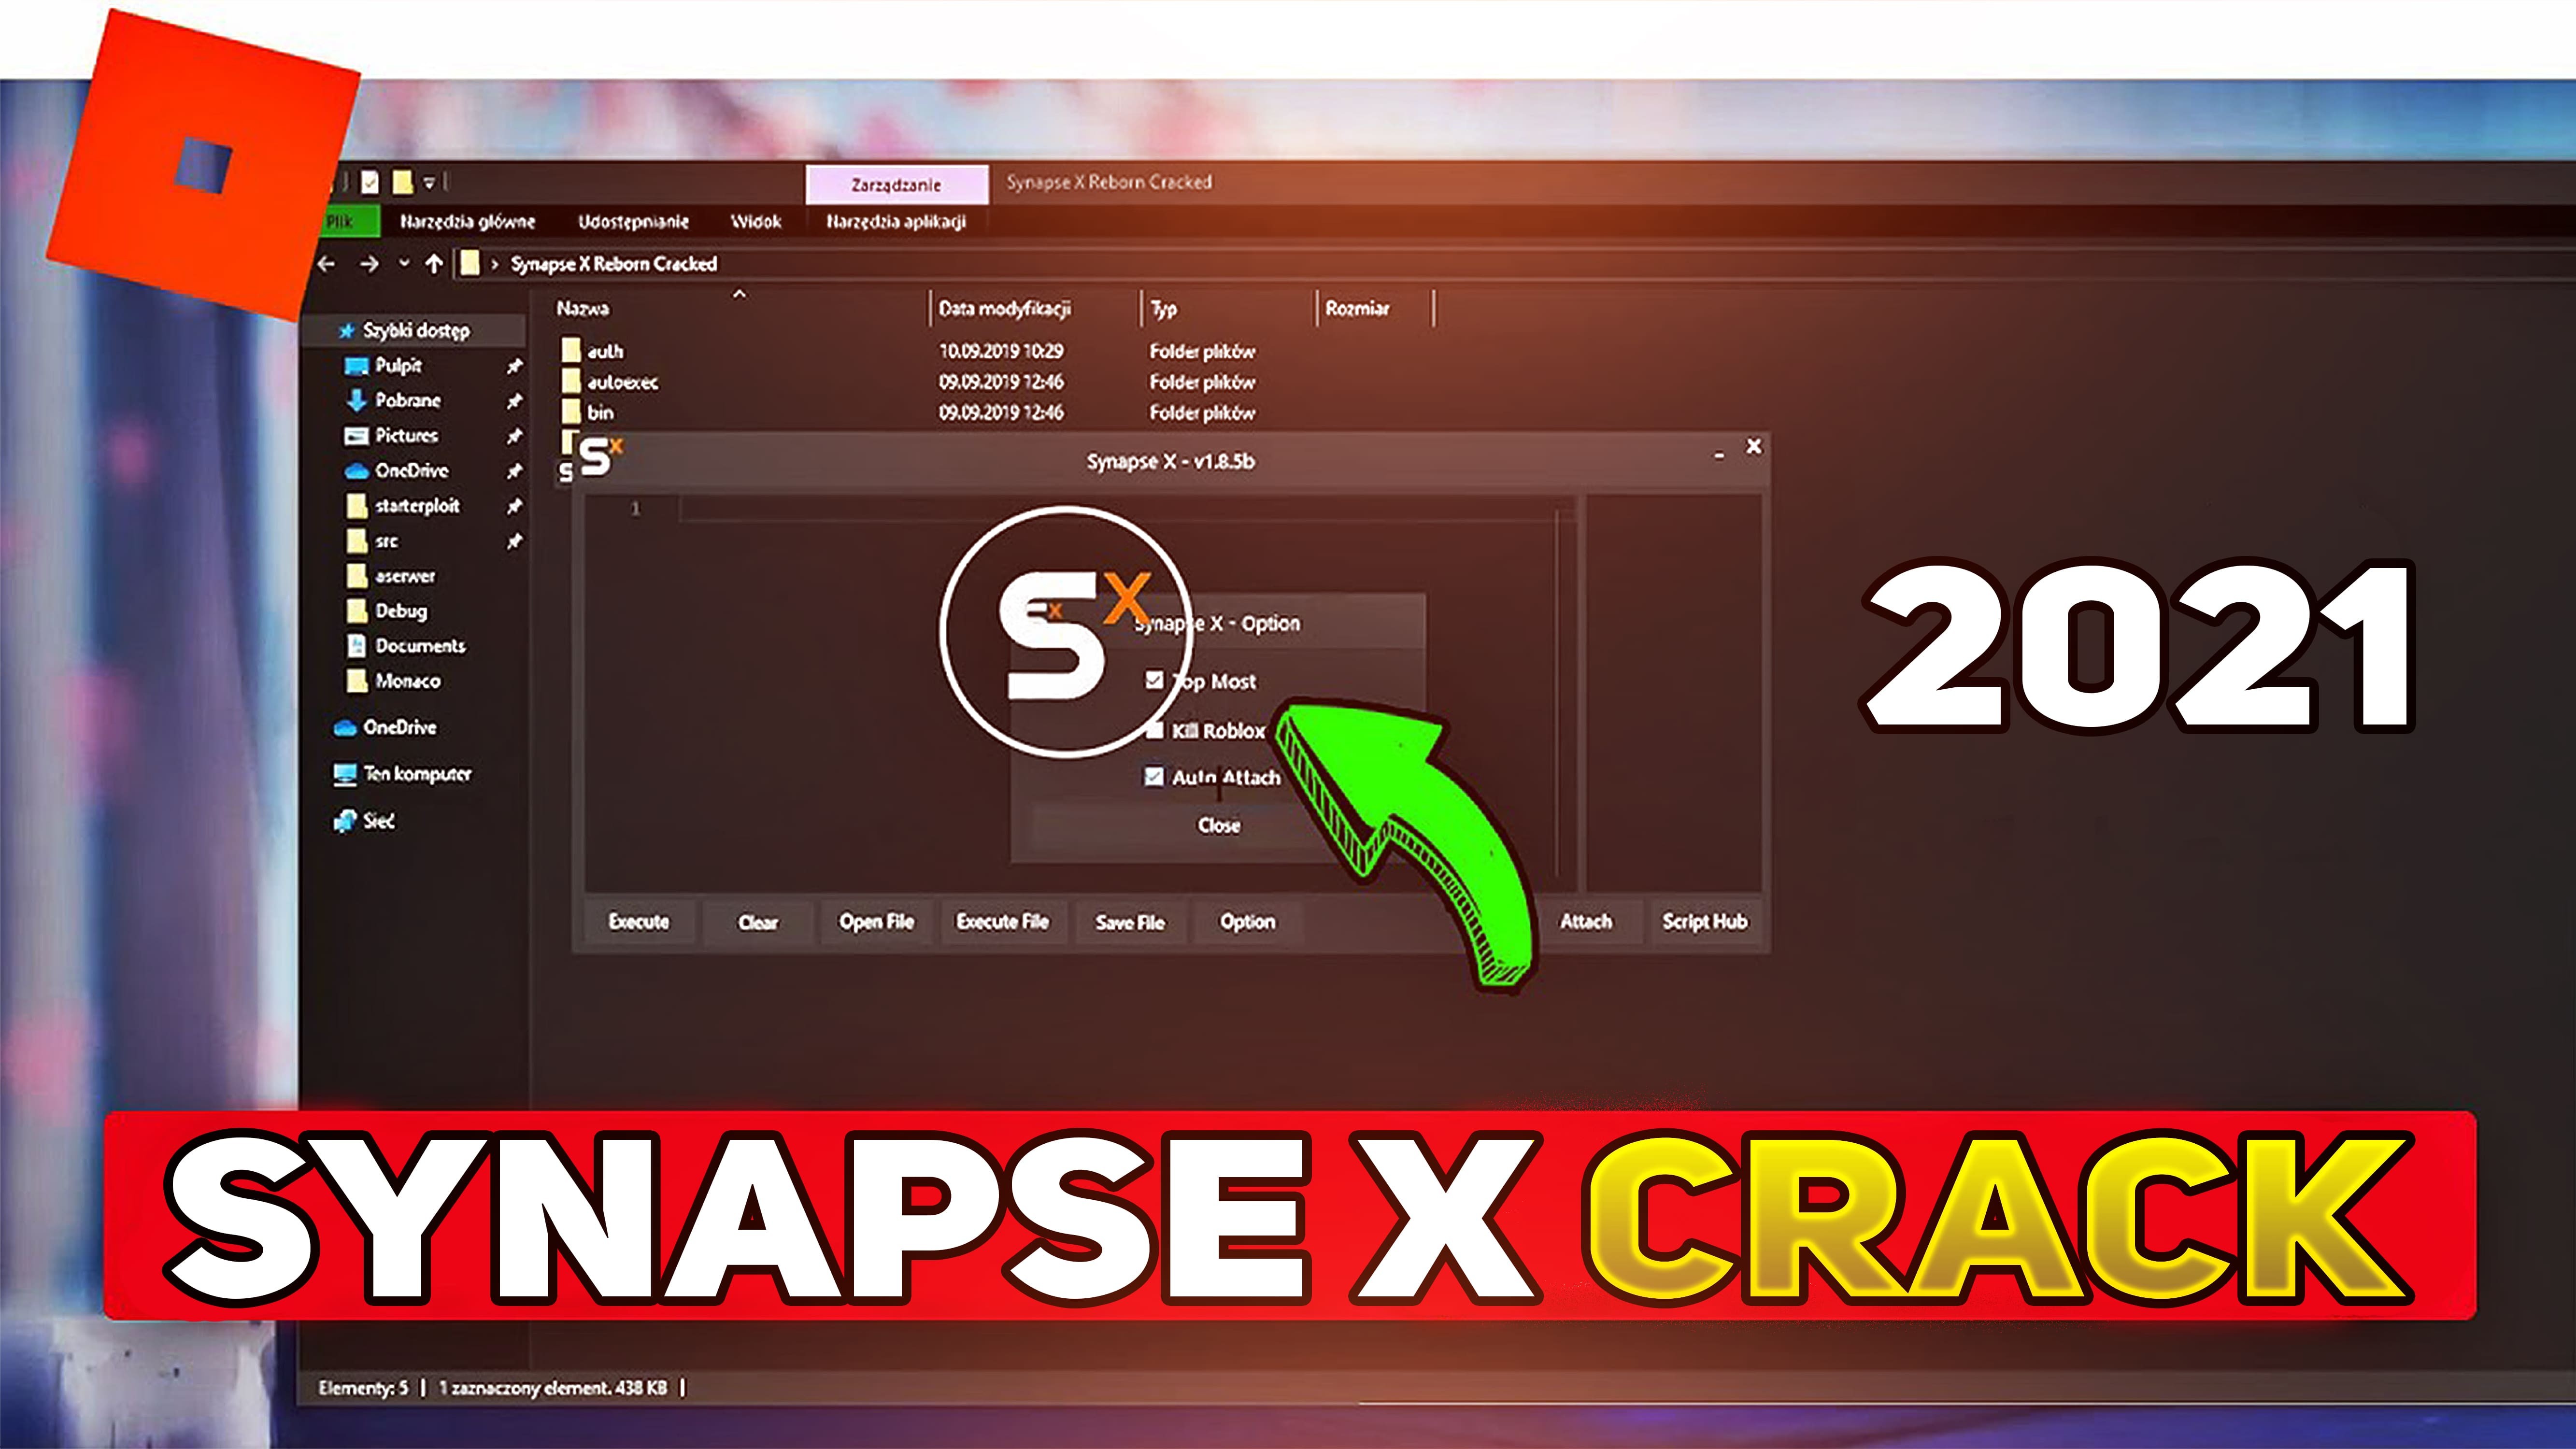 Roblox Synapse X Cracked 2021 Teletype - roblox synapse cracked